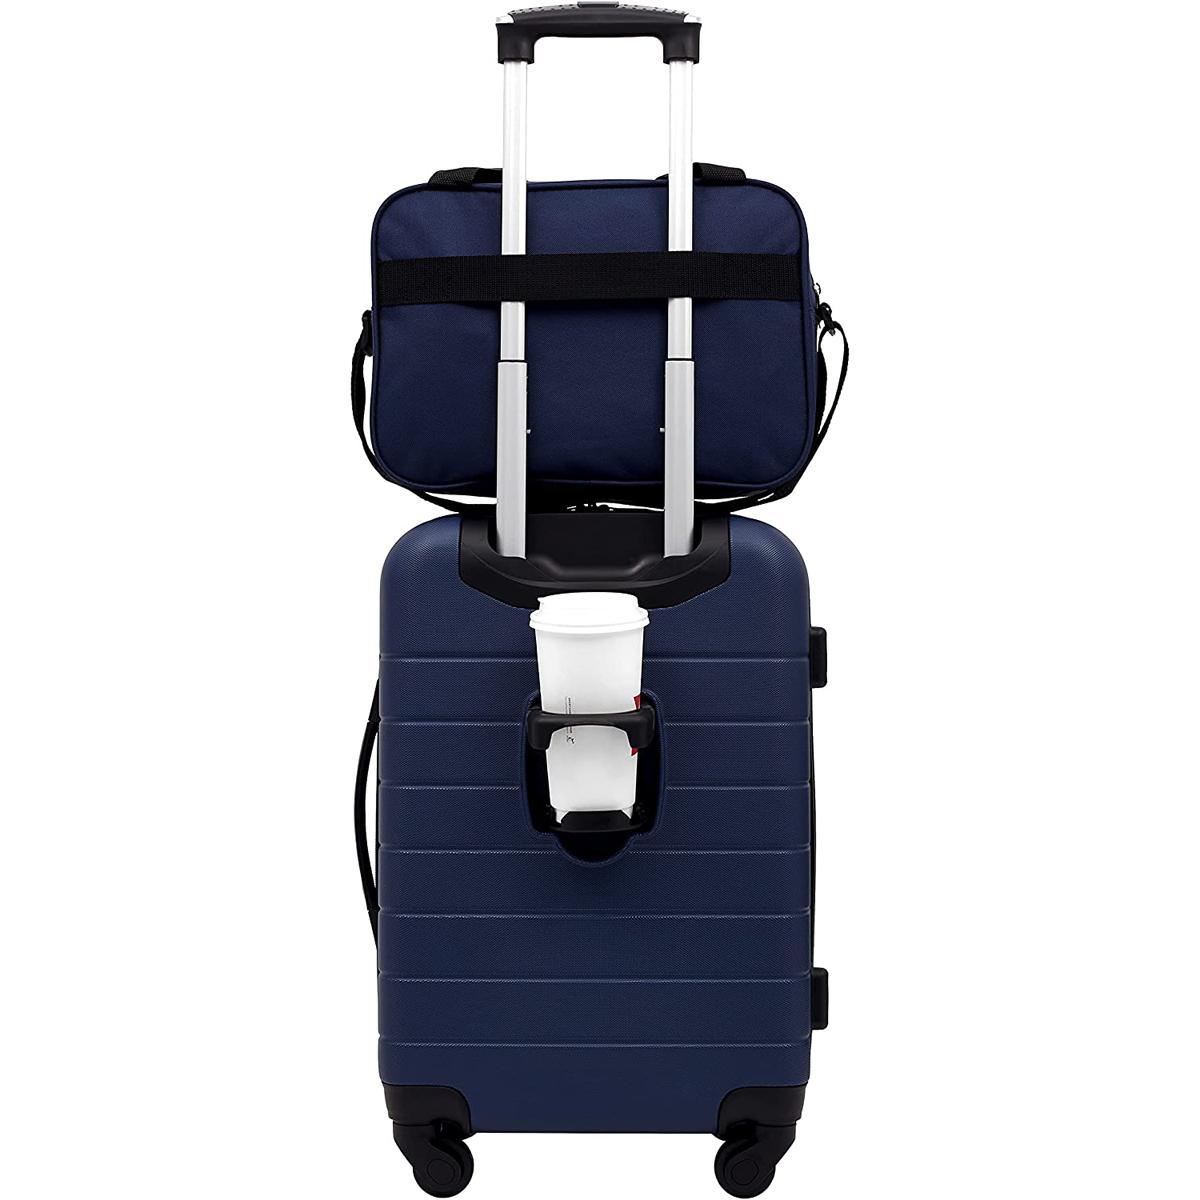 Wrangler Smart Luggage Set with Cup Holder and USB Support for $53.99 Shipped